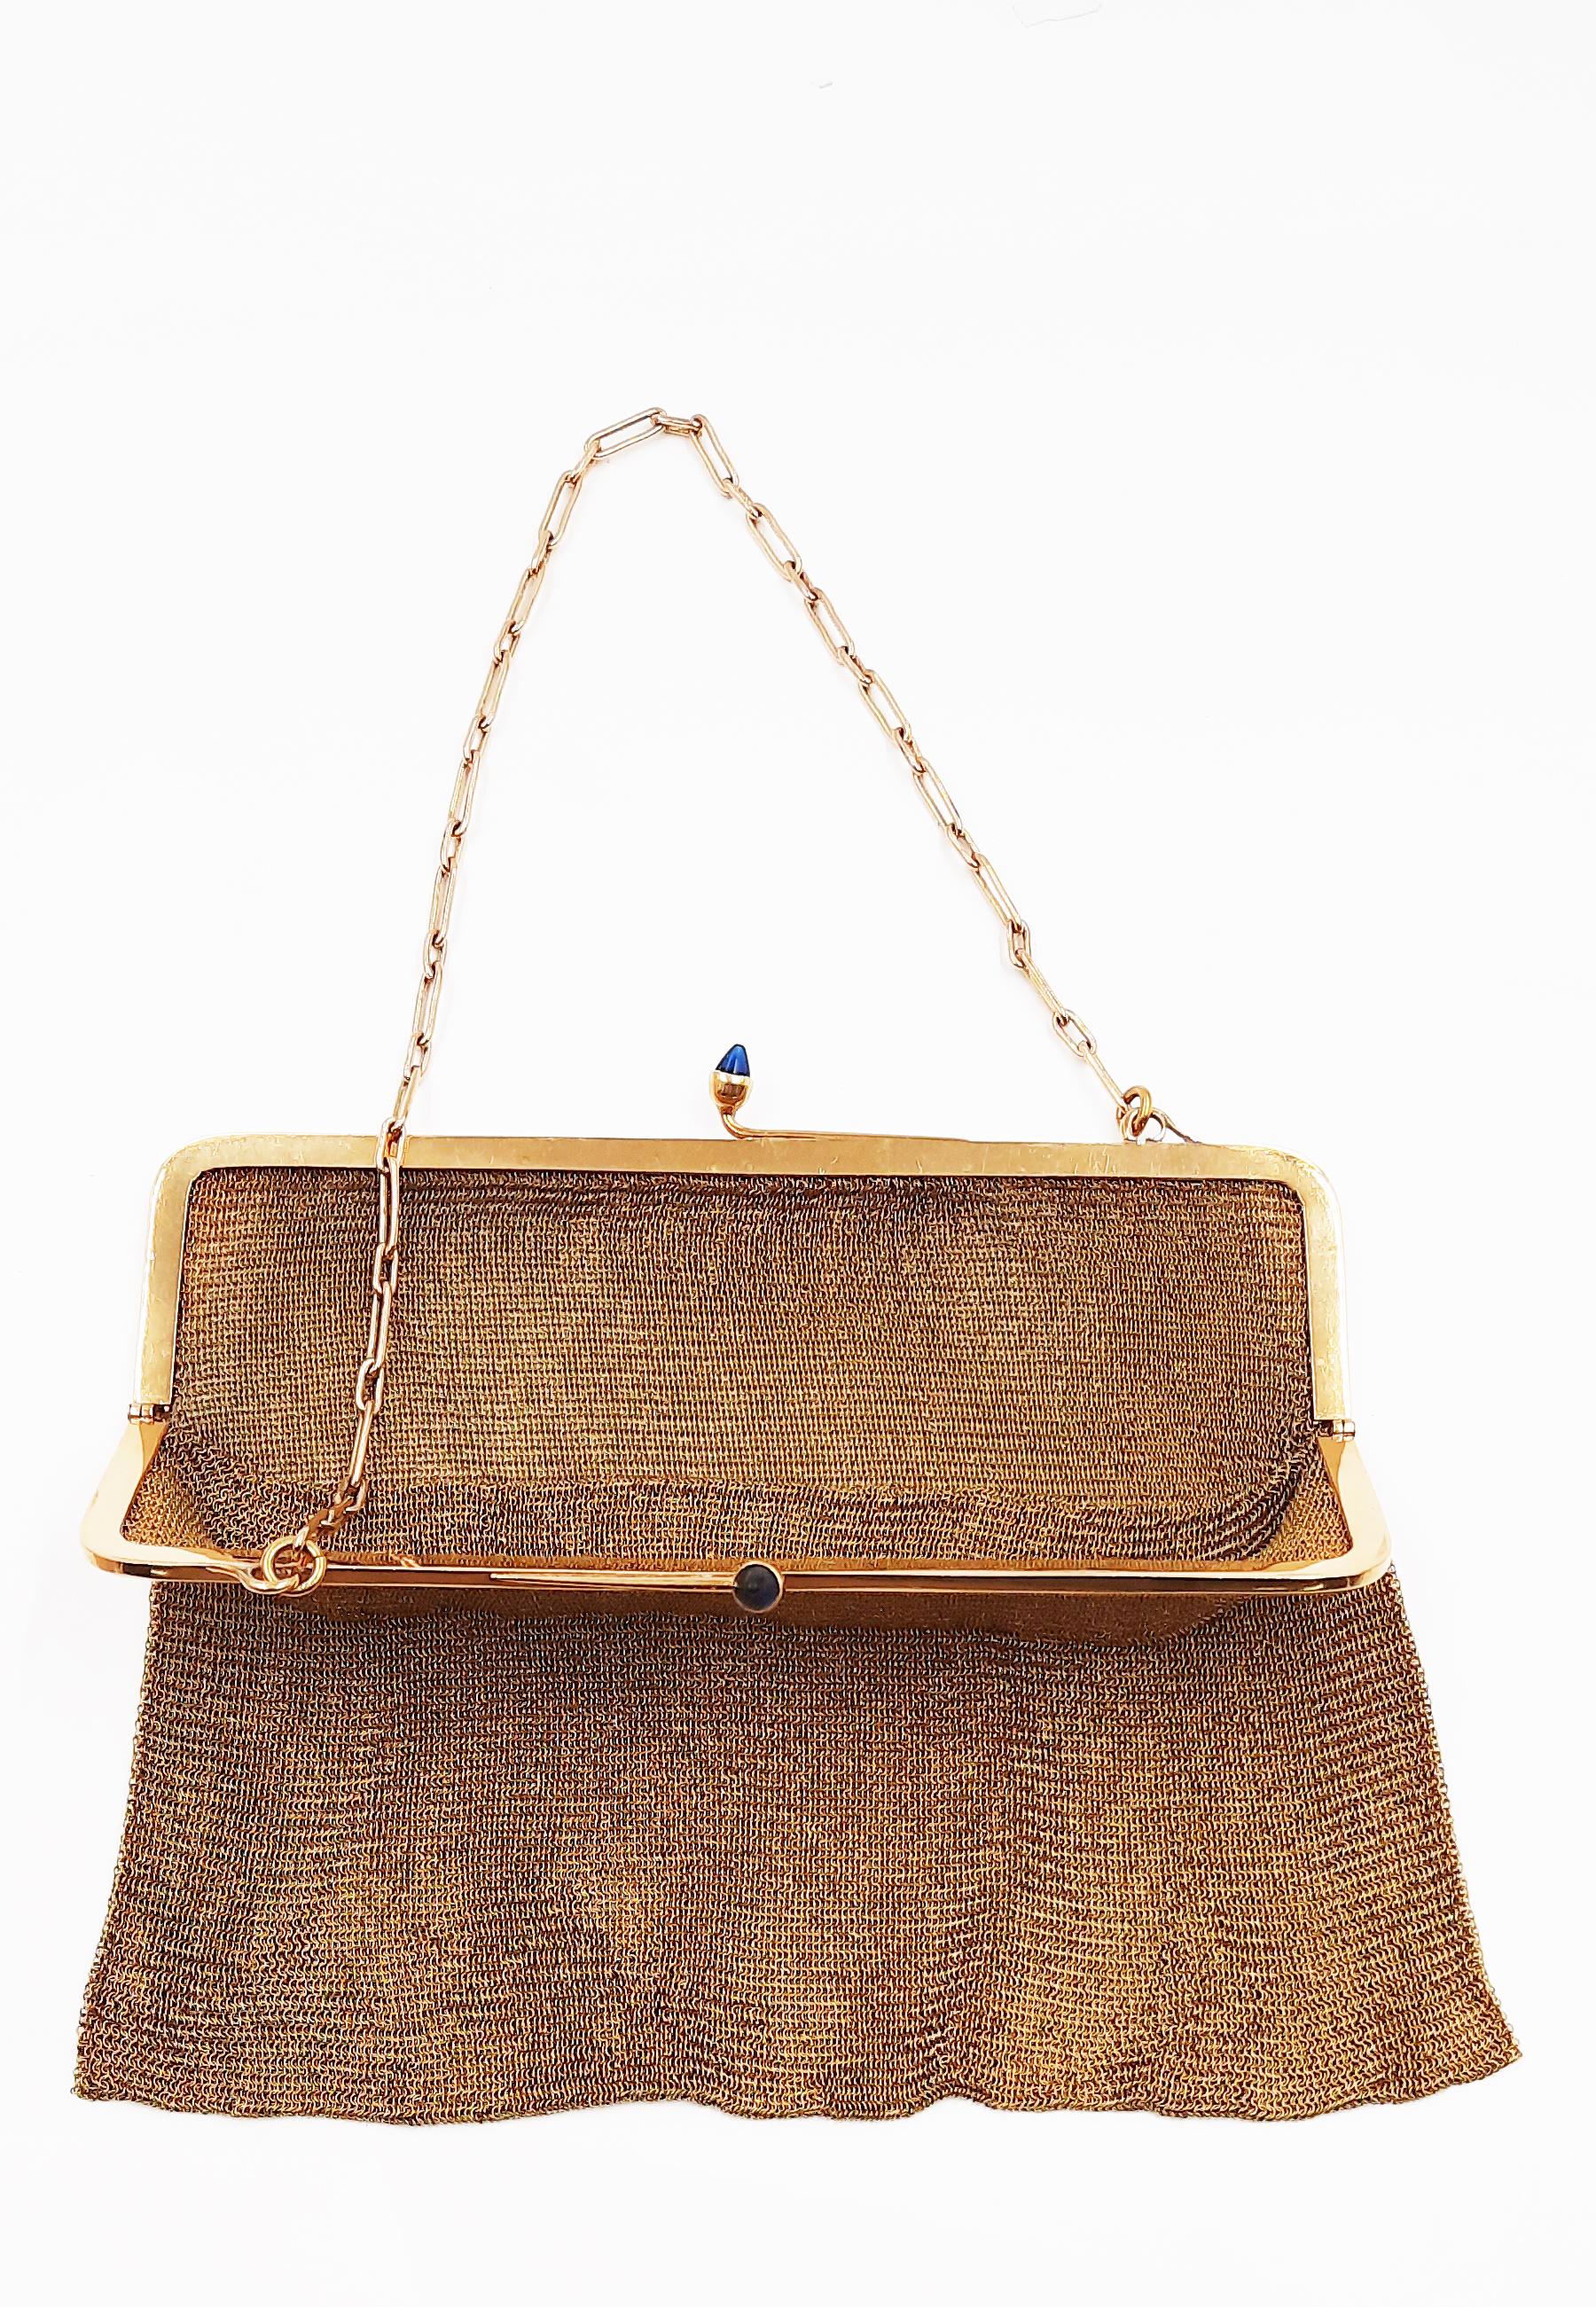 Antique, Italian 18 carats gold mesh handbag with chain. Ideal for a gala event. With blue stones. No hallmarks or stamps, but tested as gold. Circa 1900. Weight 389,90 grams, 85 x 65 millimeters (with the chain: 340 millimeters). 